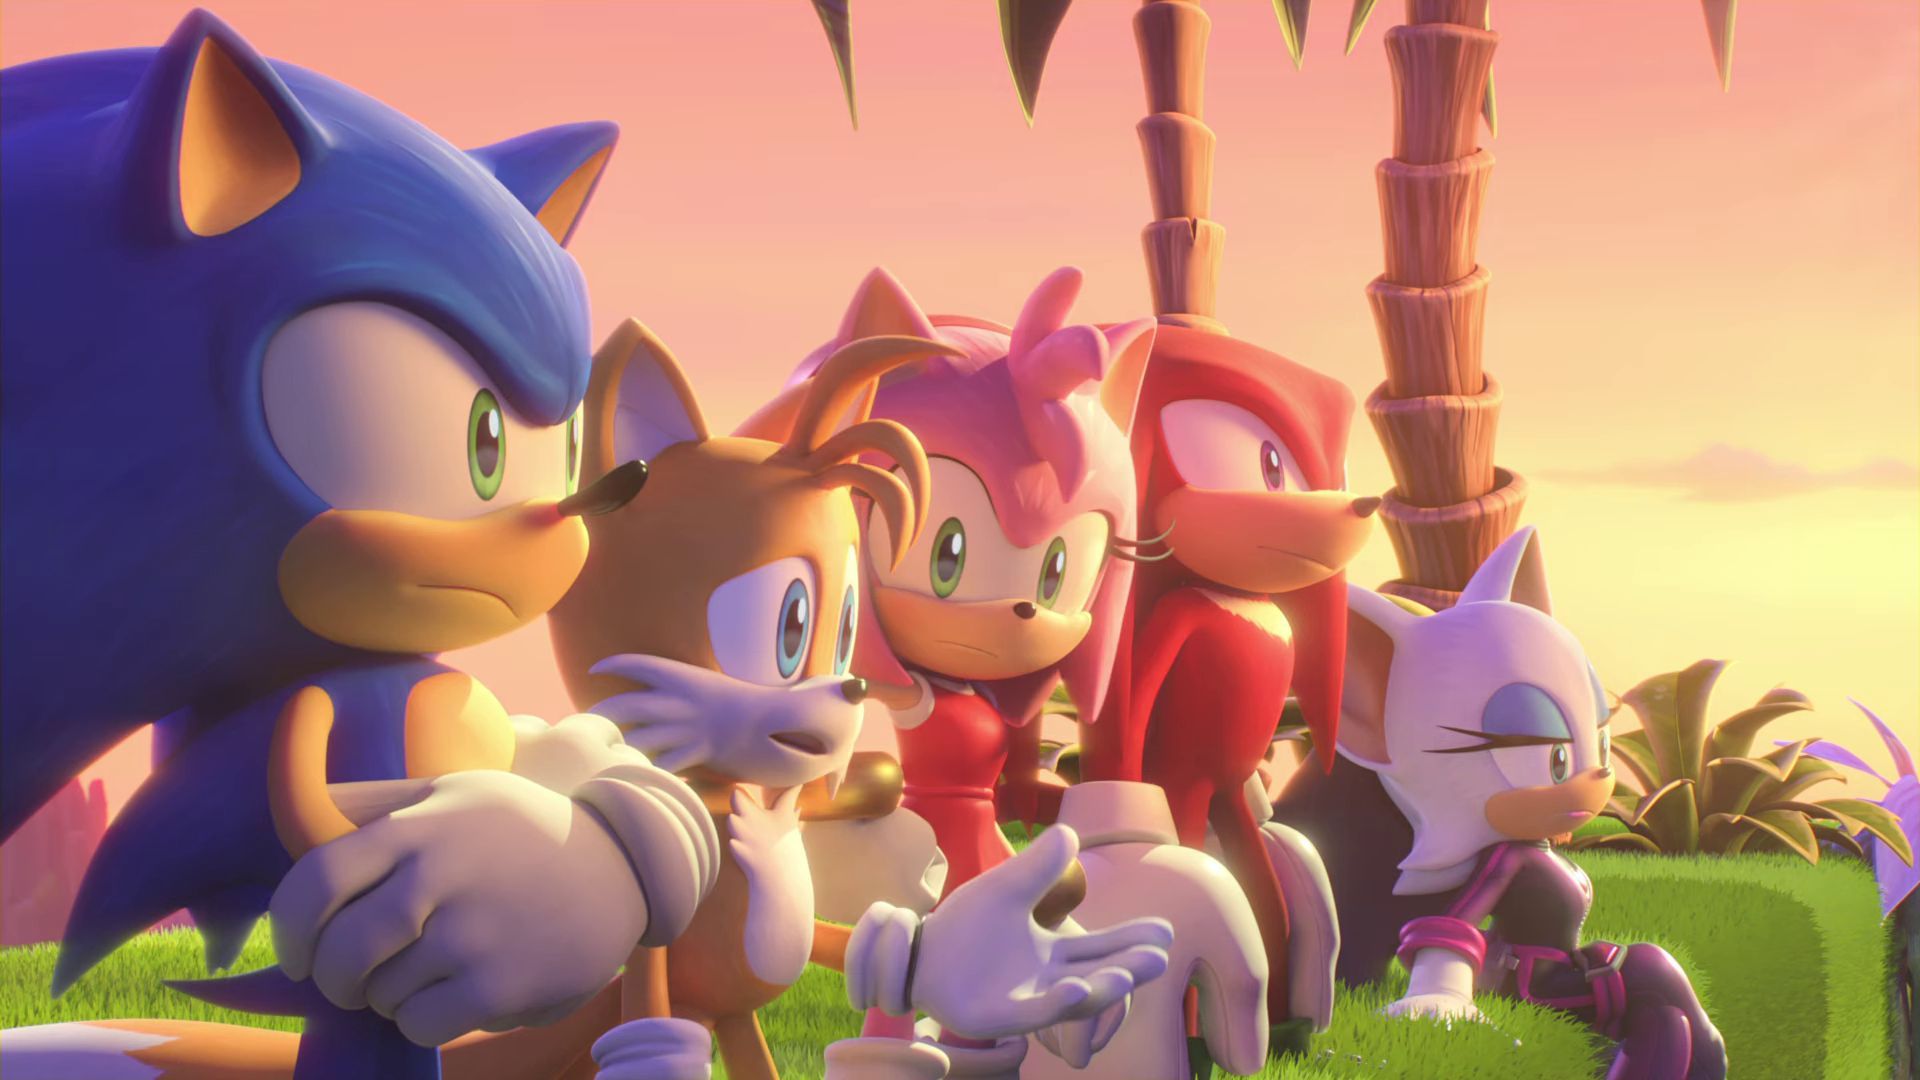 More Sonic Prime Episodes Confirmed to Release In 2023 UPDATED – Sonic City